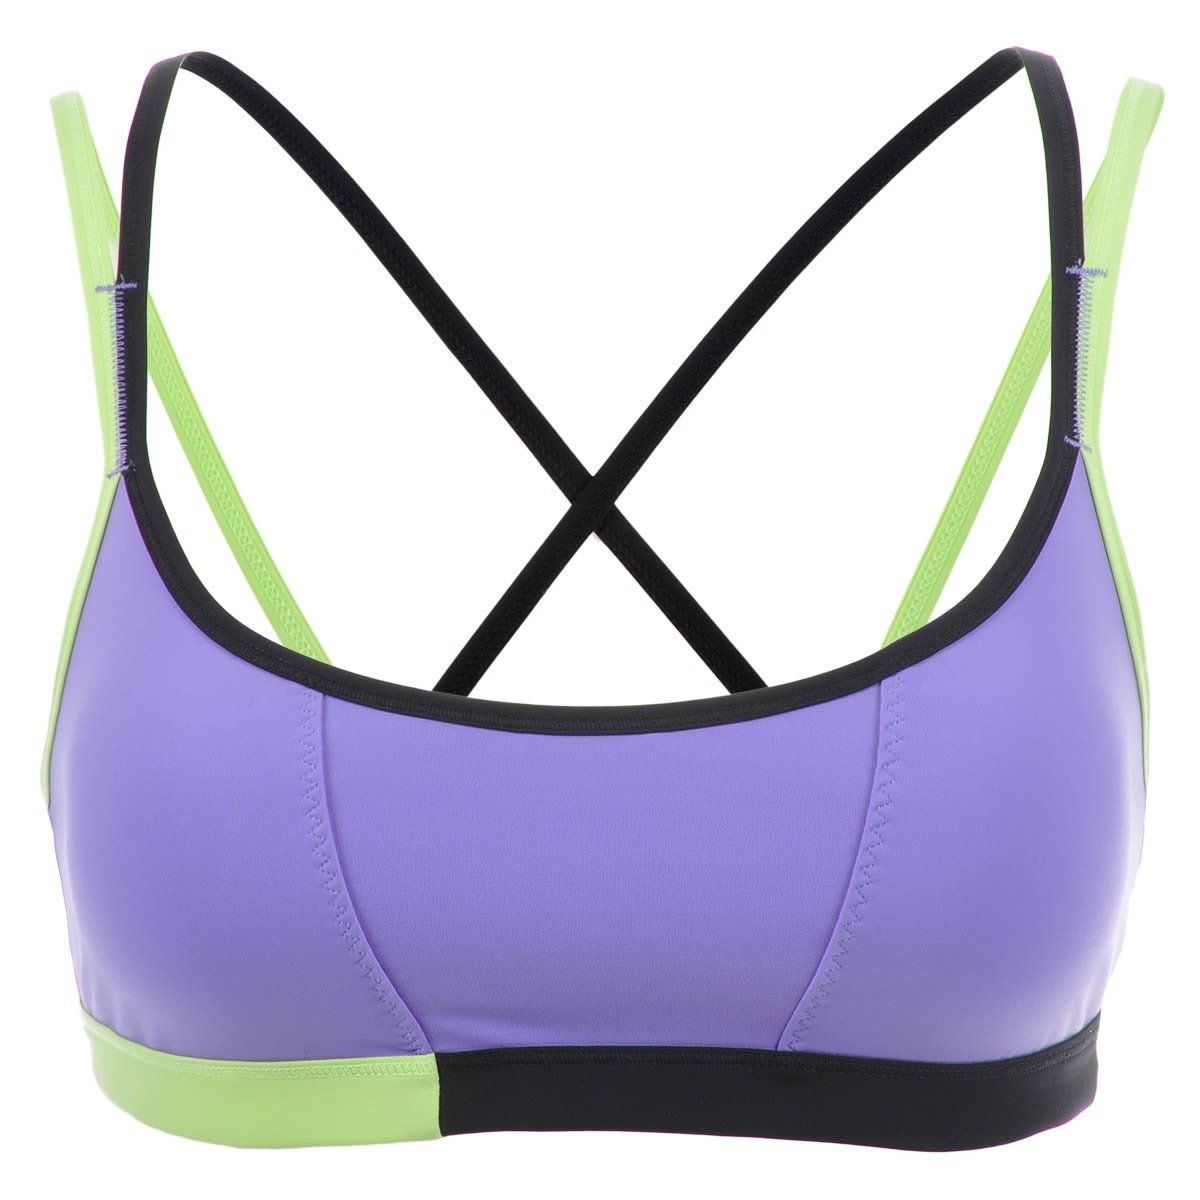 Backless Sports Bras: Support and Style for Active Women